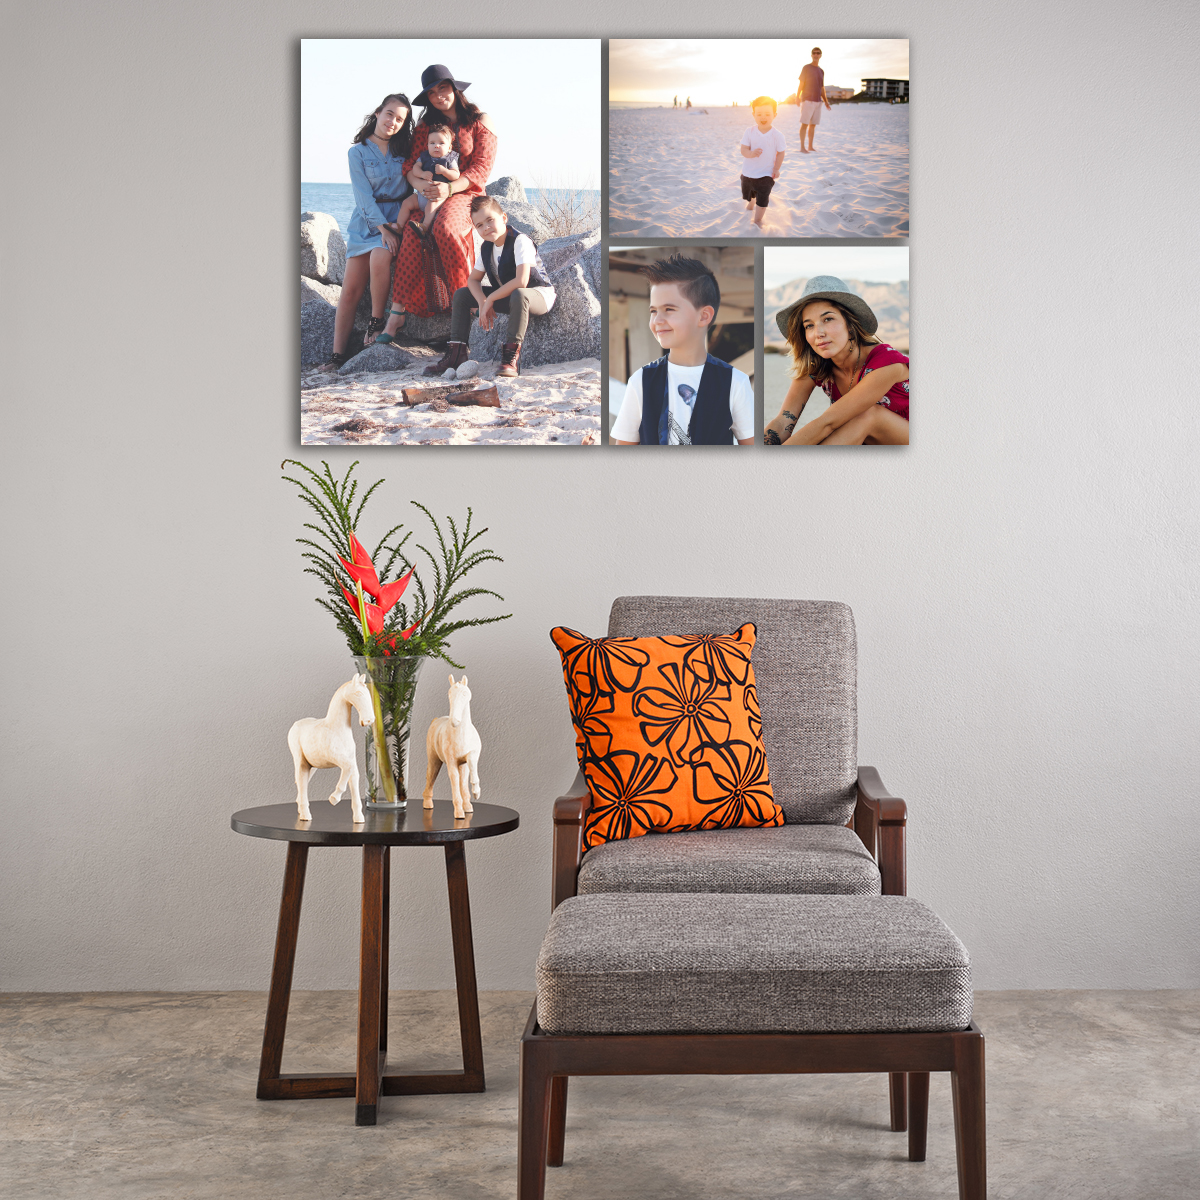 ArtisanHD Wall Art Gallery Clusters and Splits – Cluster 4 – Family Portraits Wall Art Collage